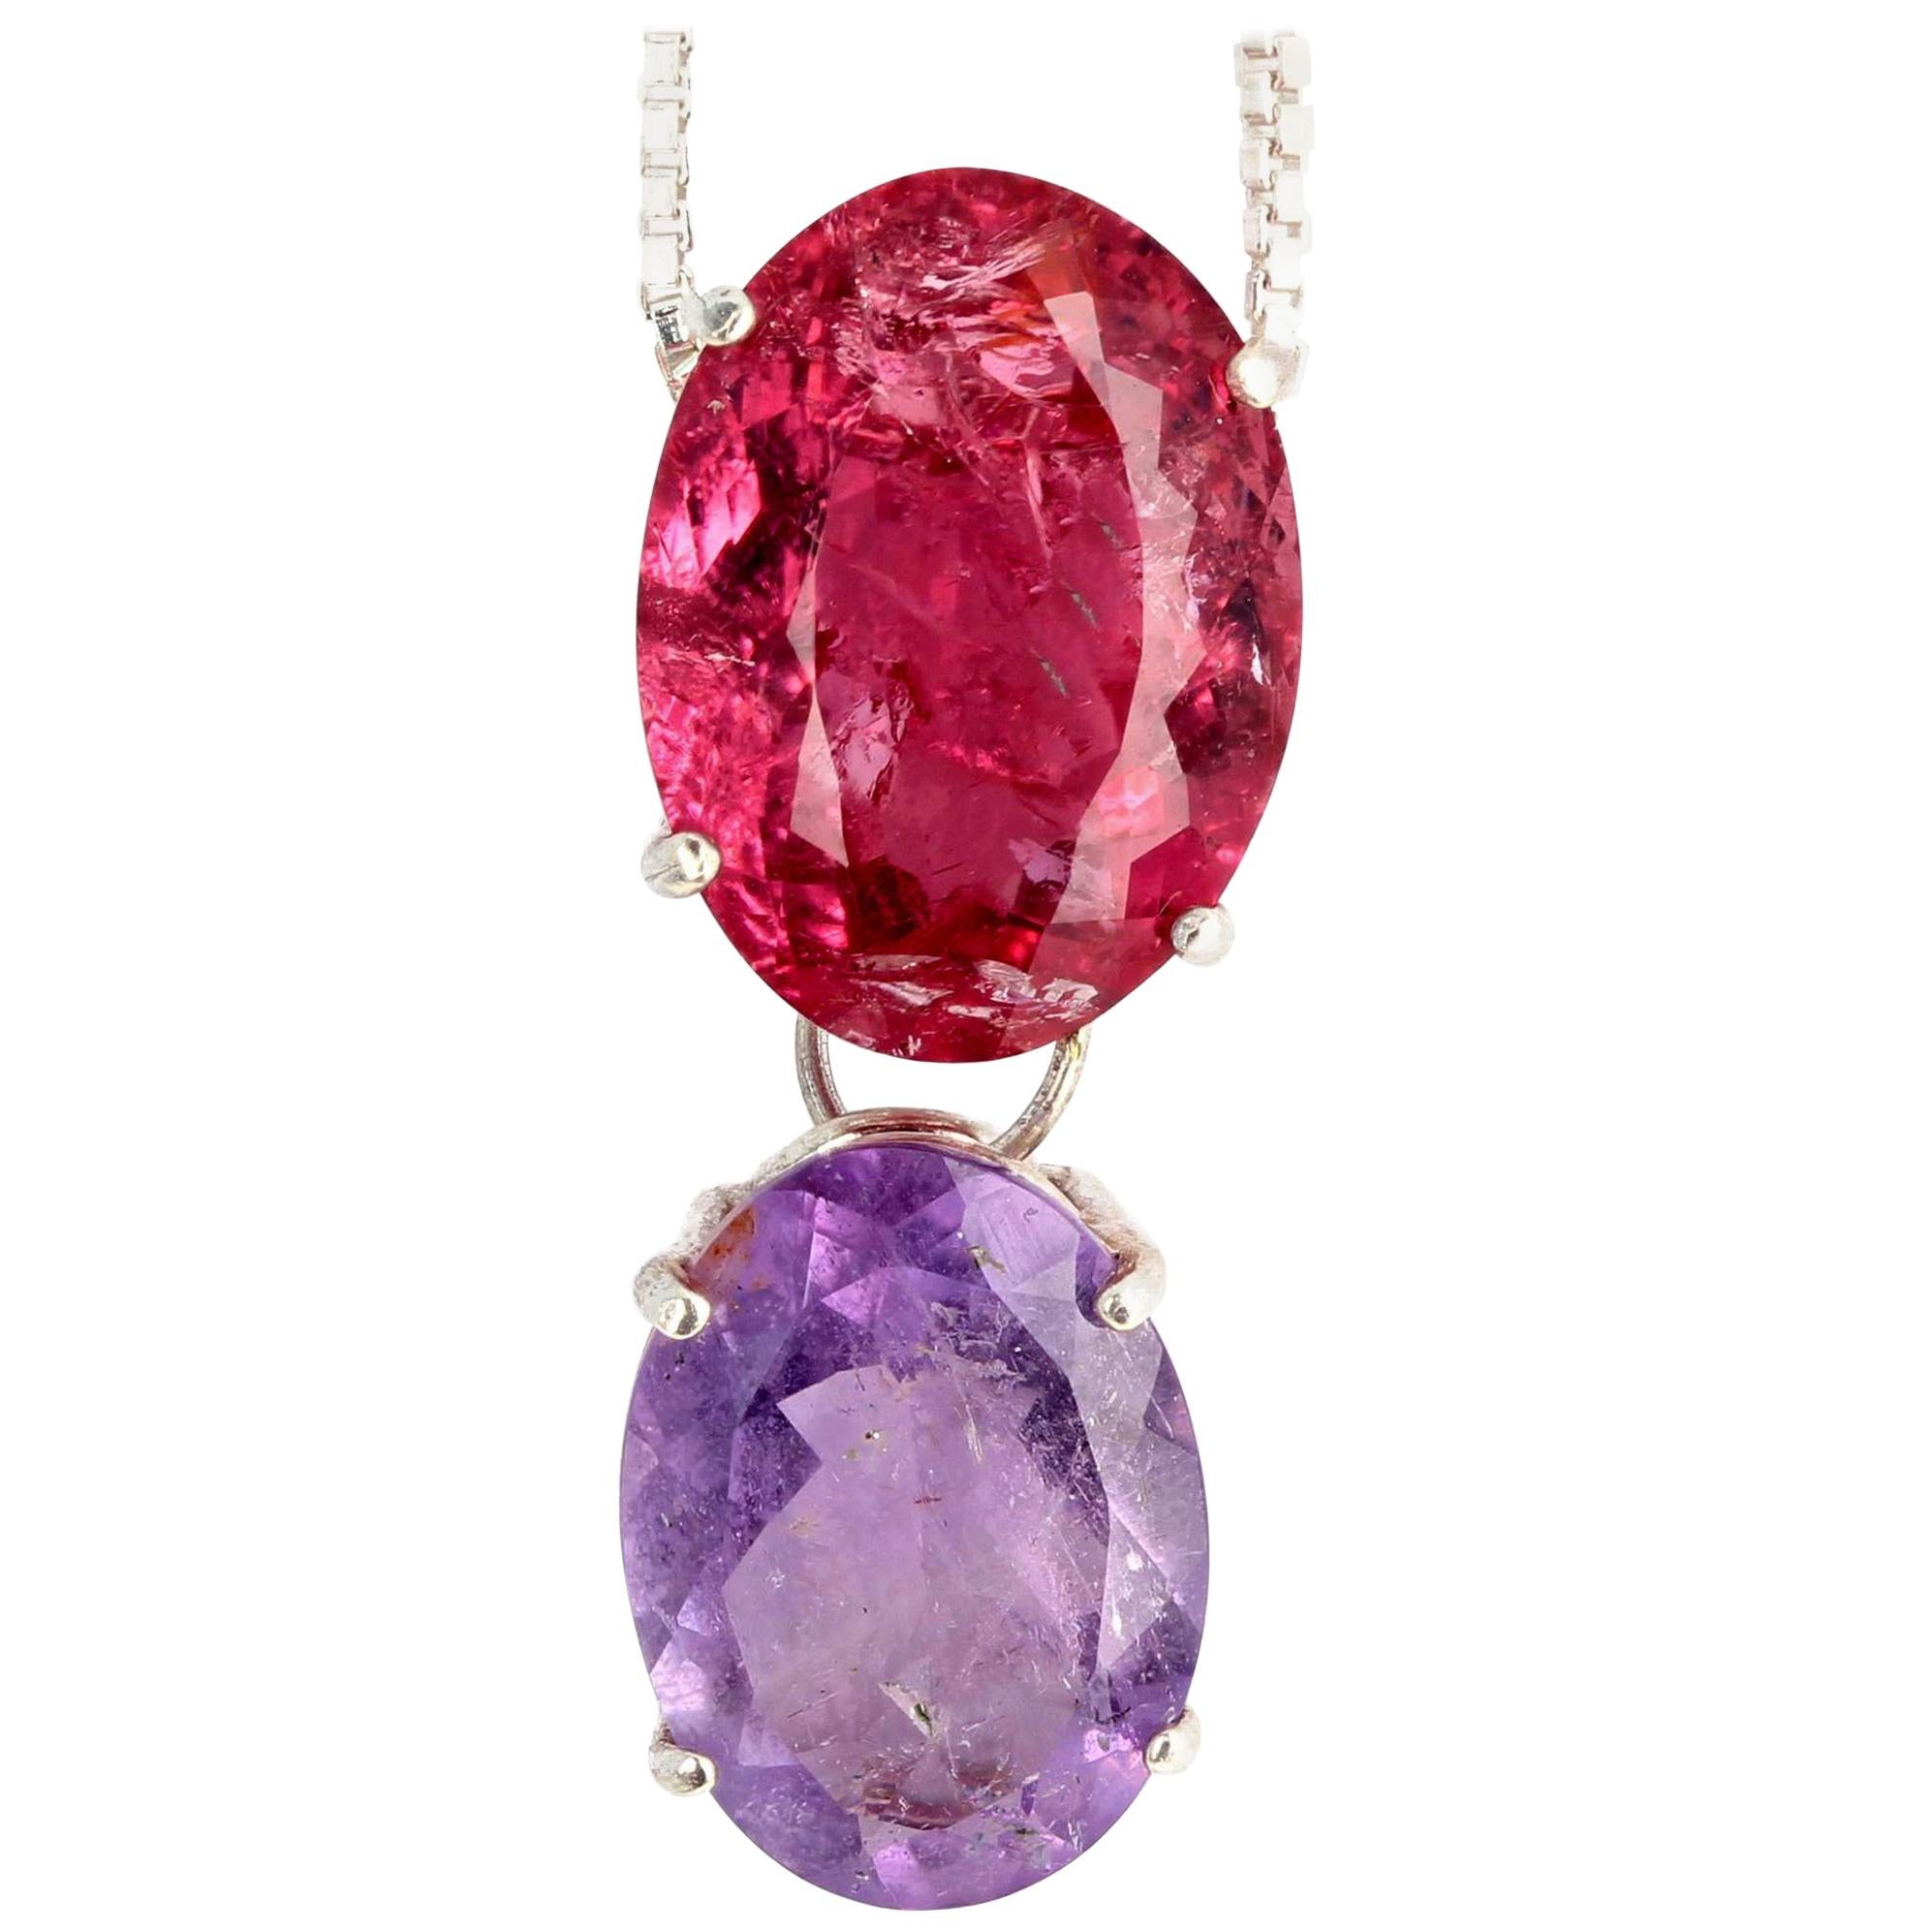 Gemjunky Candy Color 8Cts Red Tourmaline & 5Cts Purple Tourmaline Silver Pendant